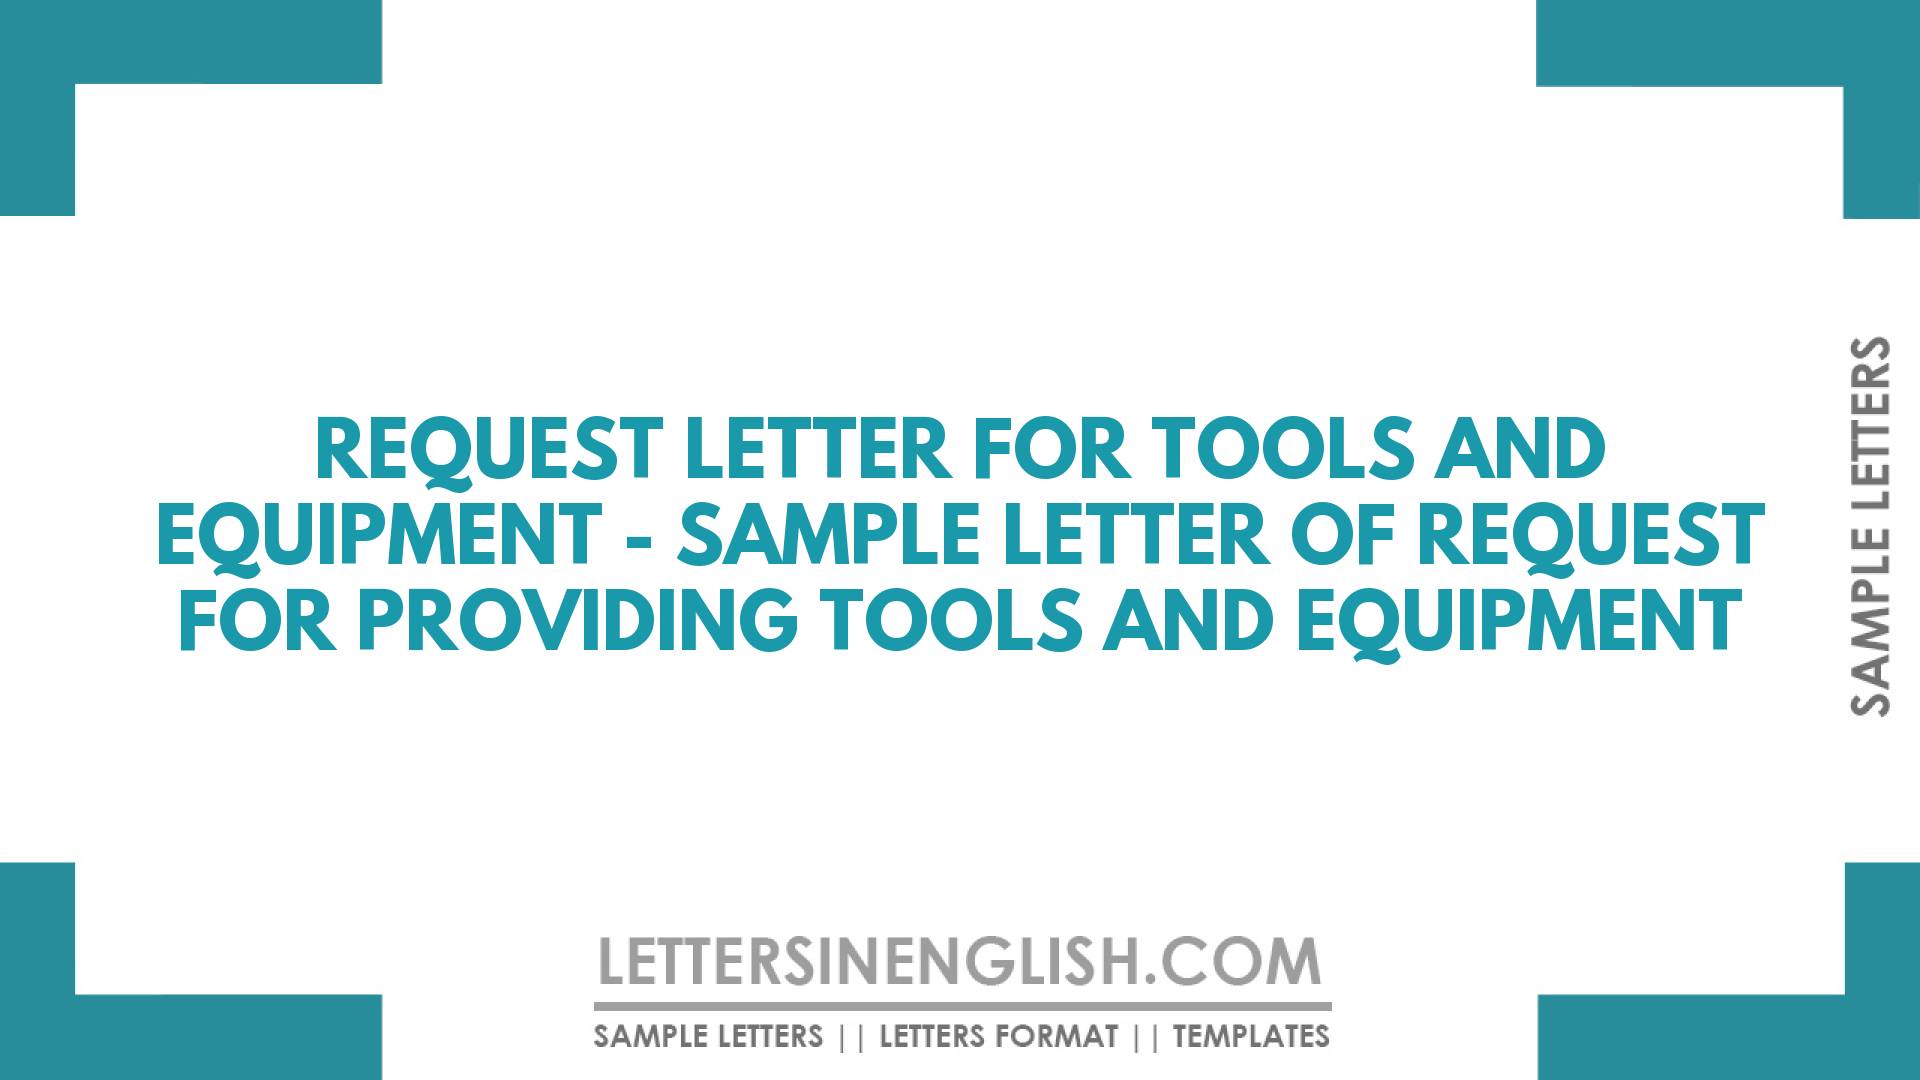 Request Letter for Tools and Equipment – Sample Letter of Request for Providing Tools and Equipment